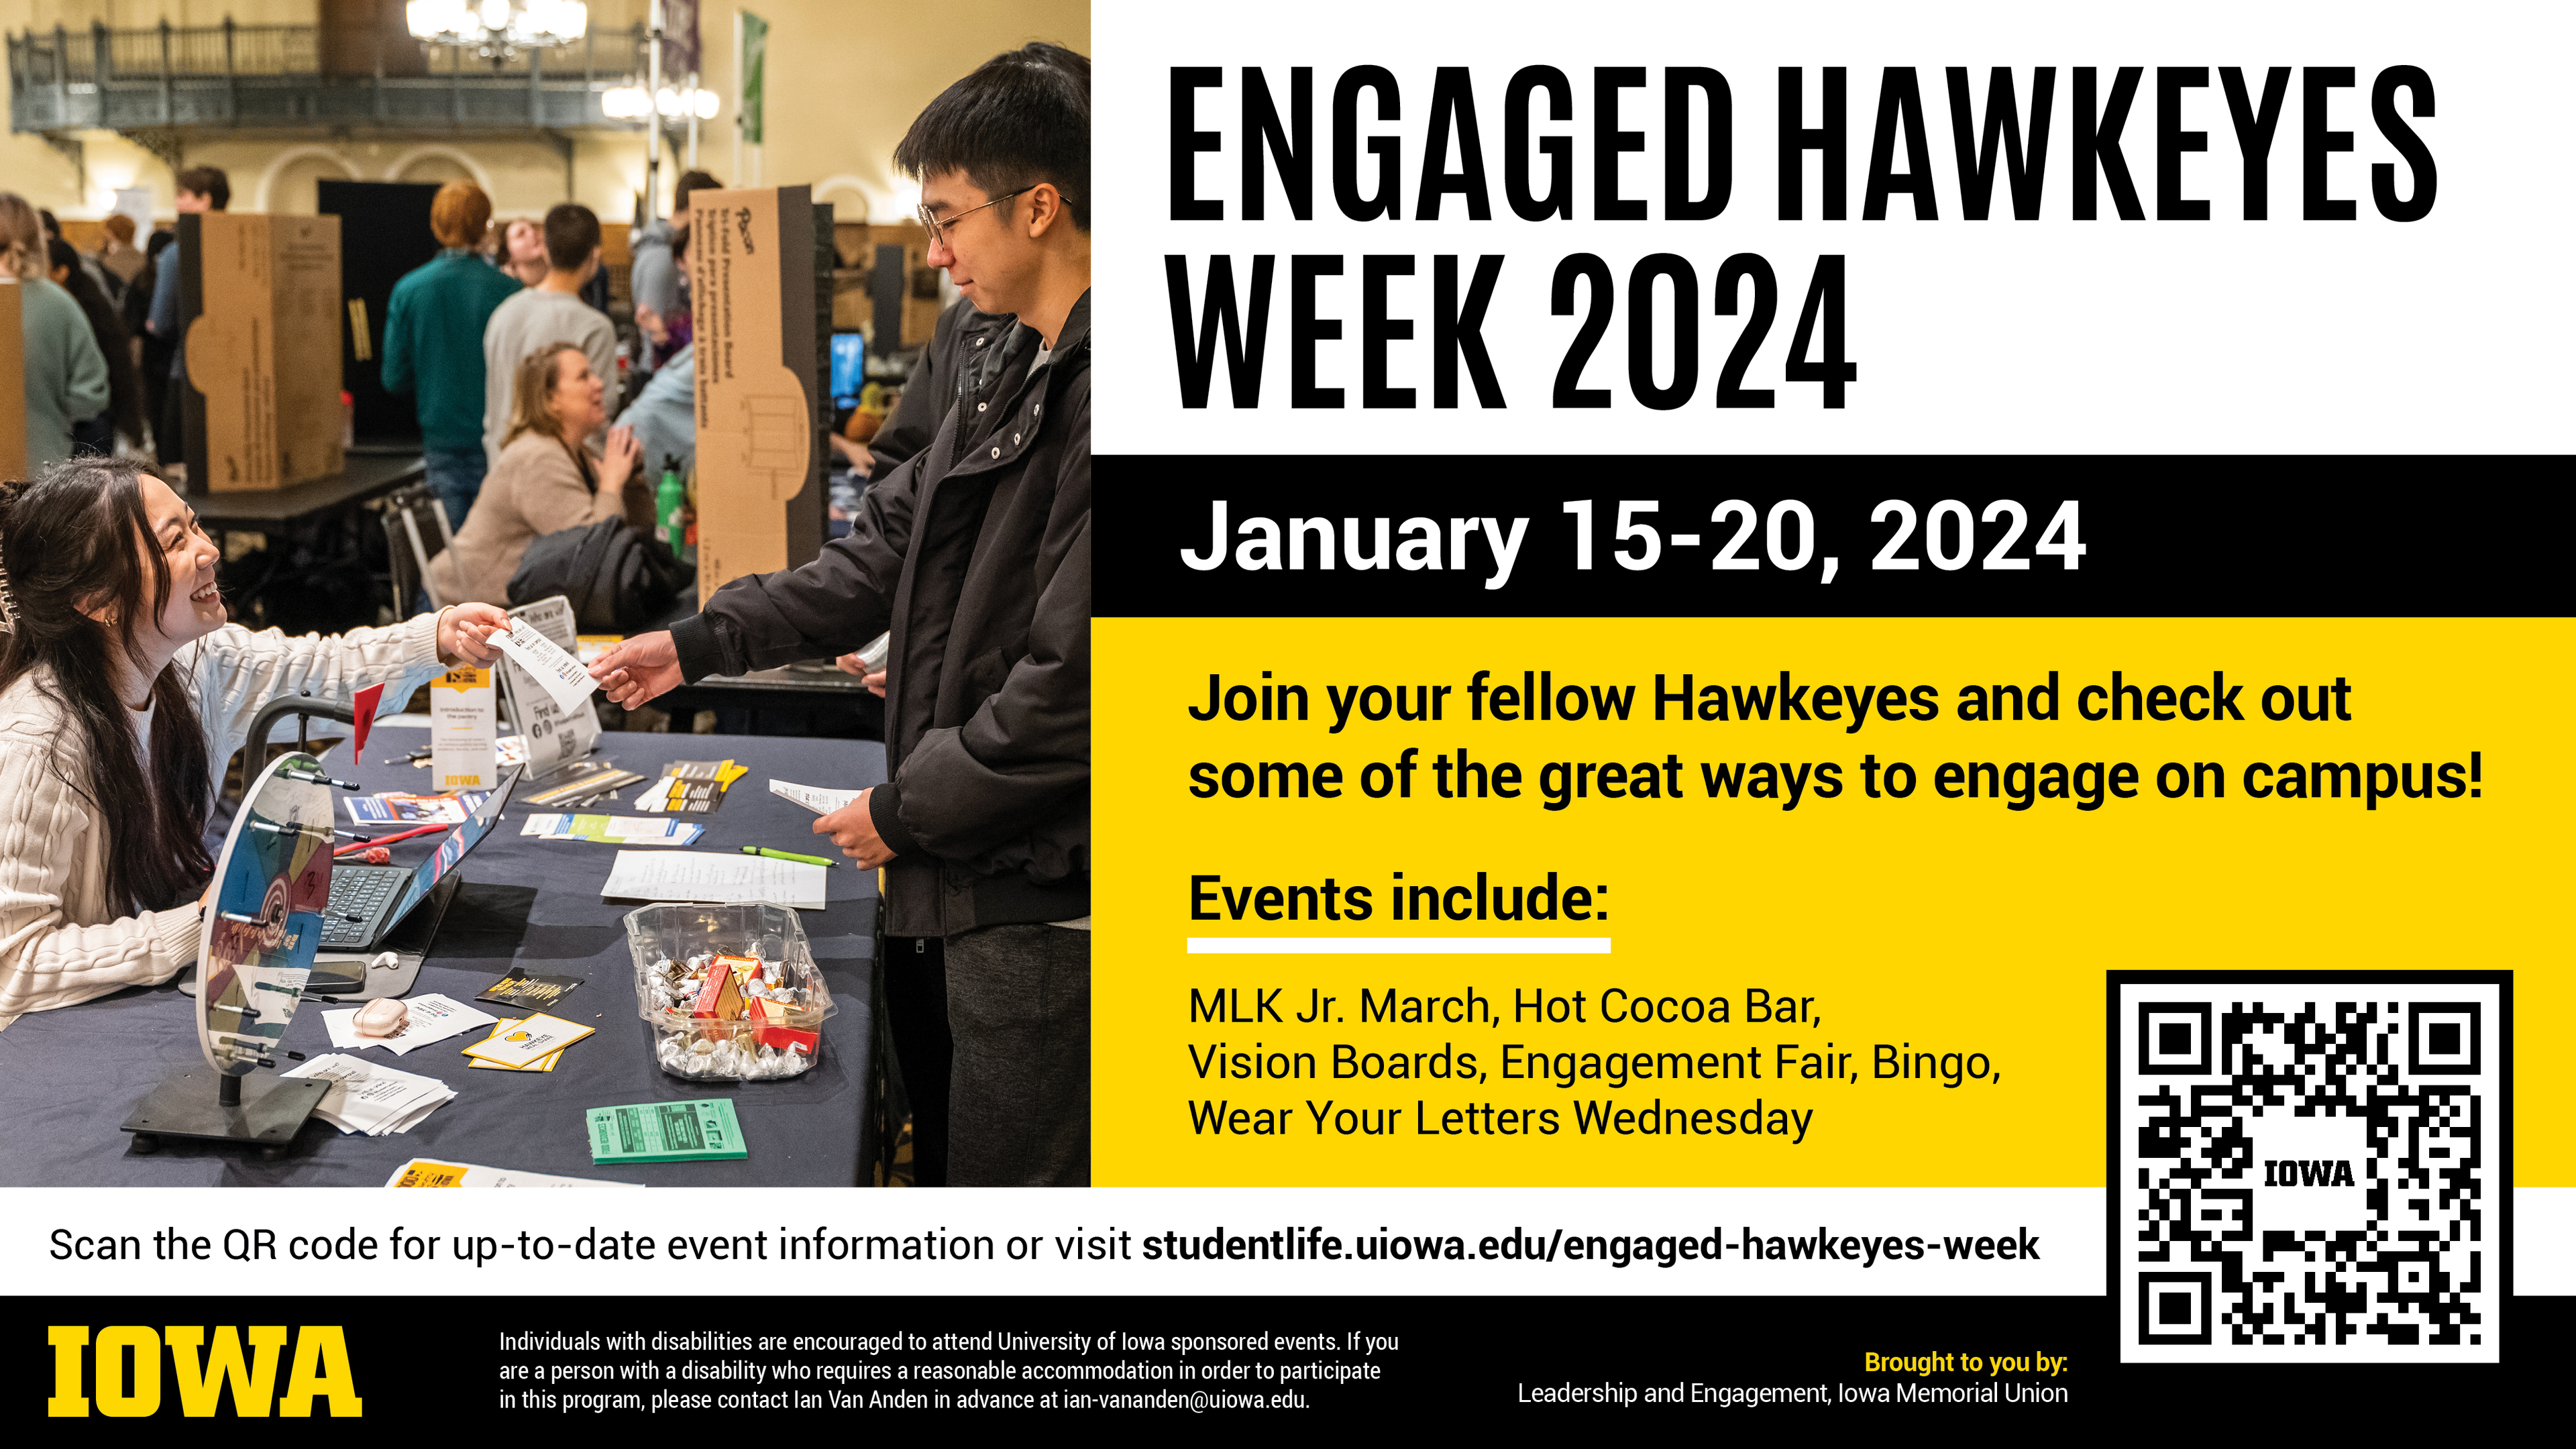 Engaged Hawkeyes Week is an opportunity for students to explore the many ways to be an involved student on campus! Getting involved on campus or in the community is the surest way to find your home away from home while at the University of Iowa.